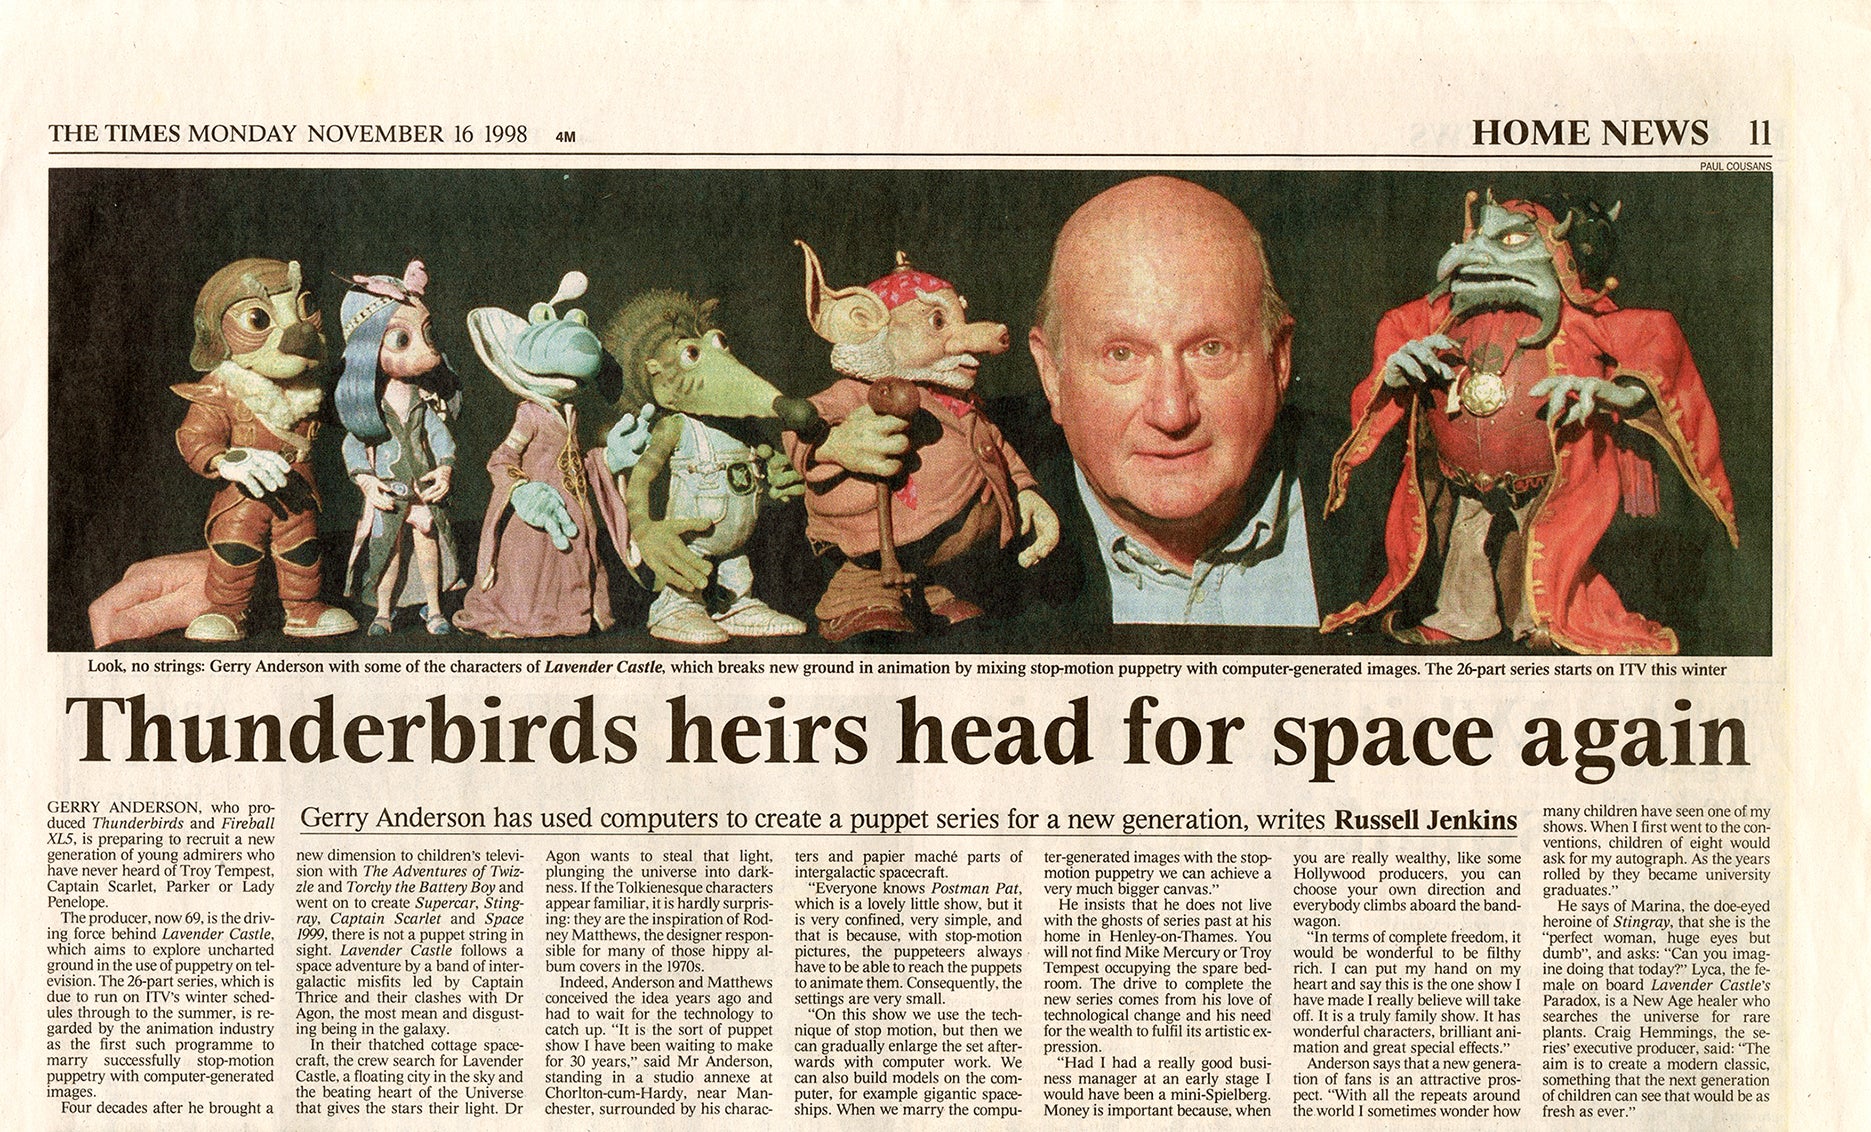 Gerry Anderson speaks Lavender Castle in The Times